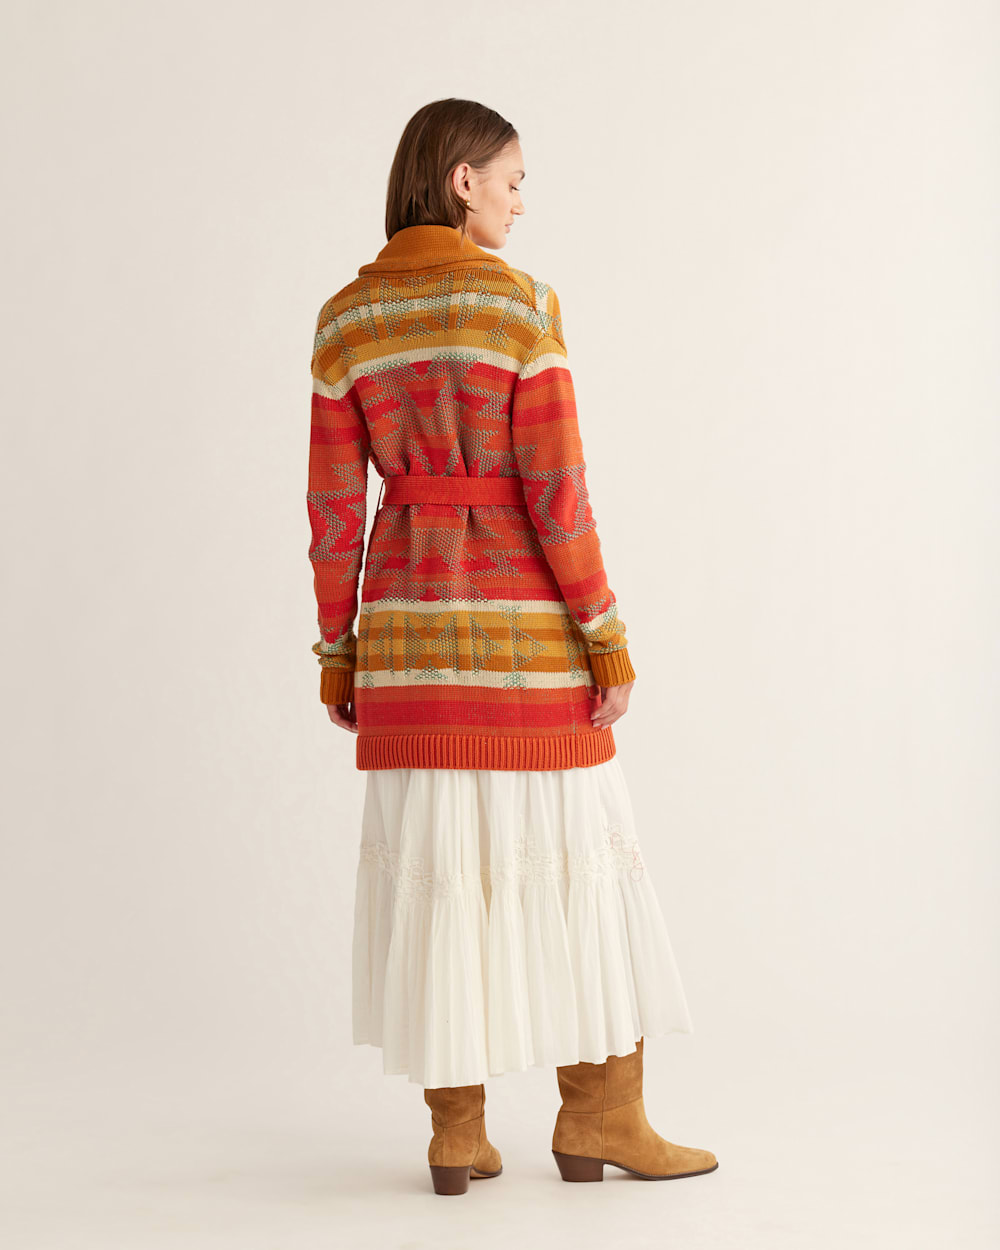 ALTERNATE VIEW OF WOMEN'S MONTEREY BELTED CARDIGAN IN RED/AQUA MULTI image number 3